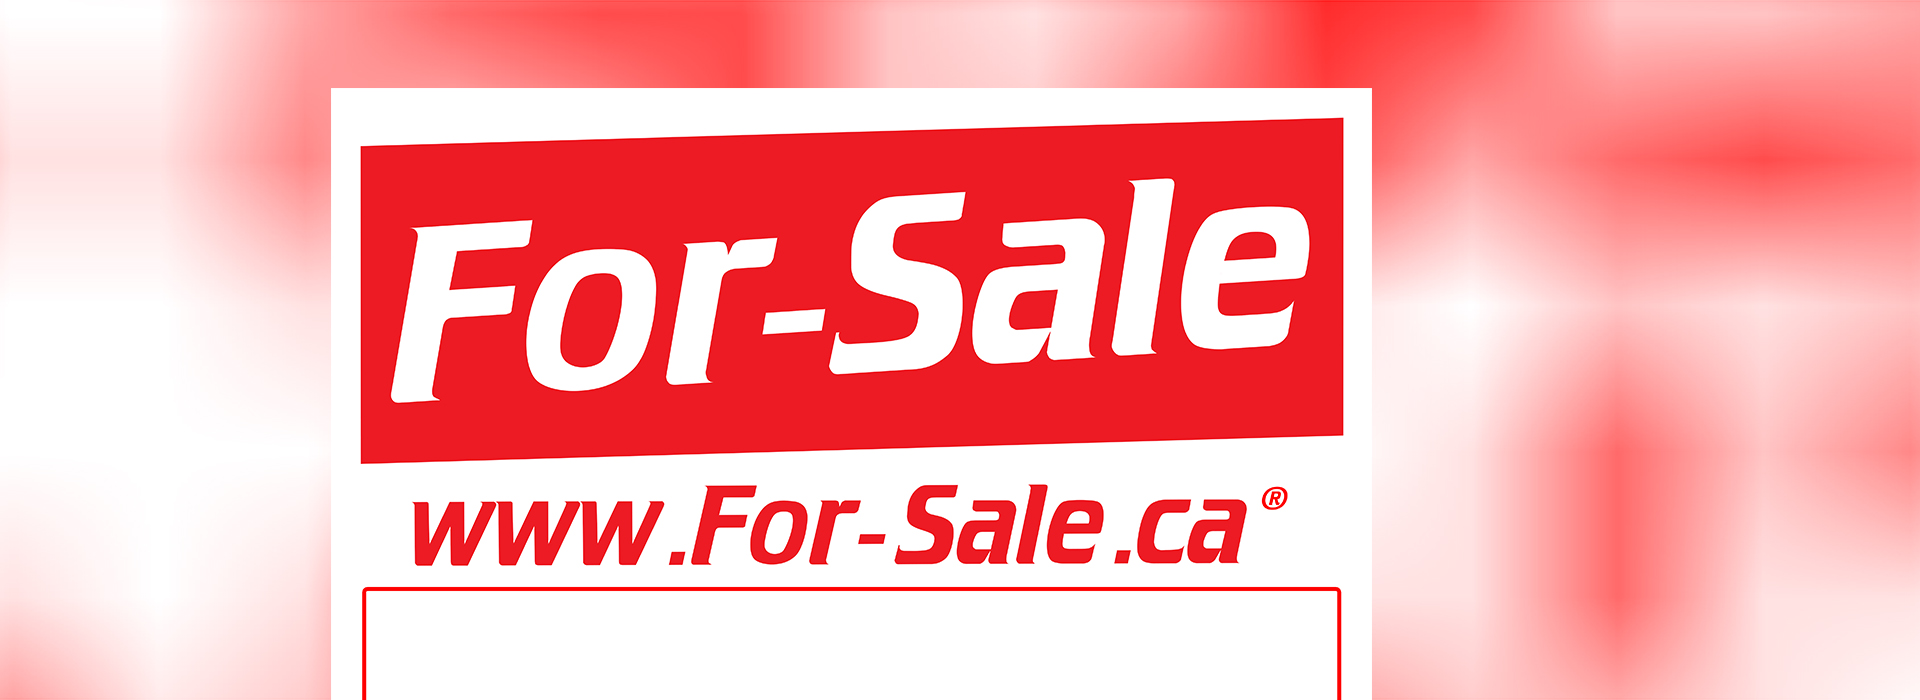 For-Sale.ca